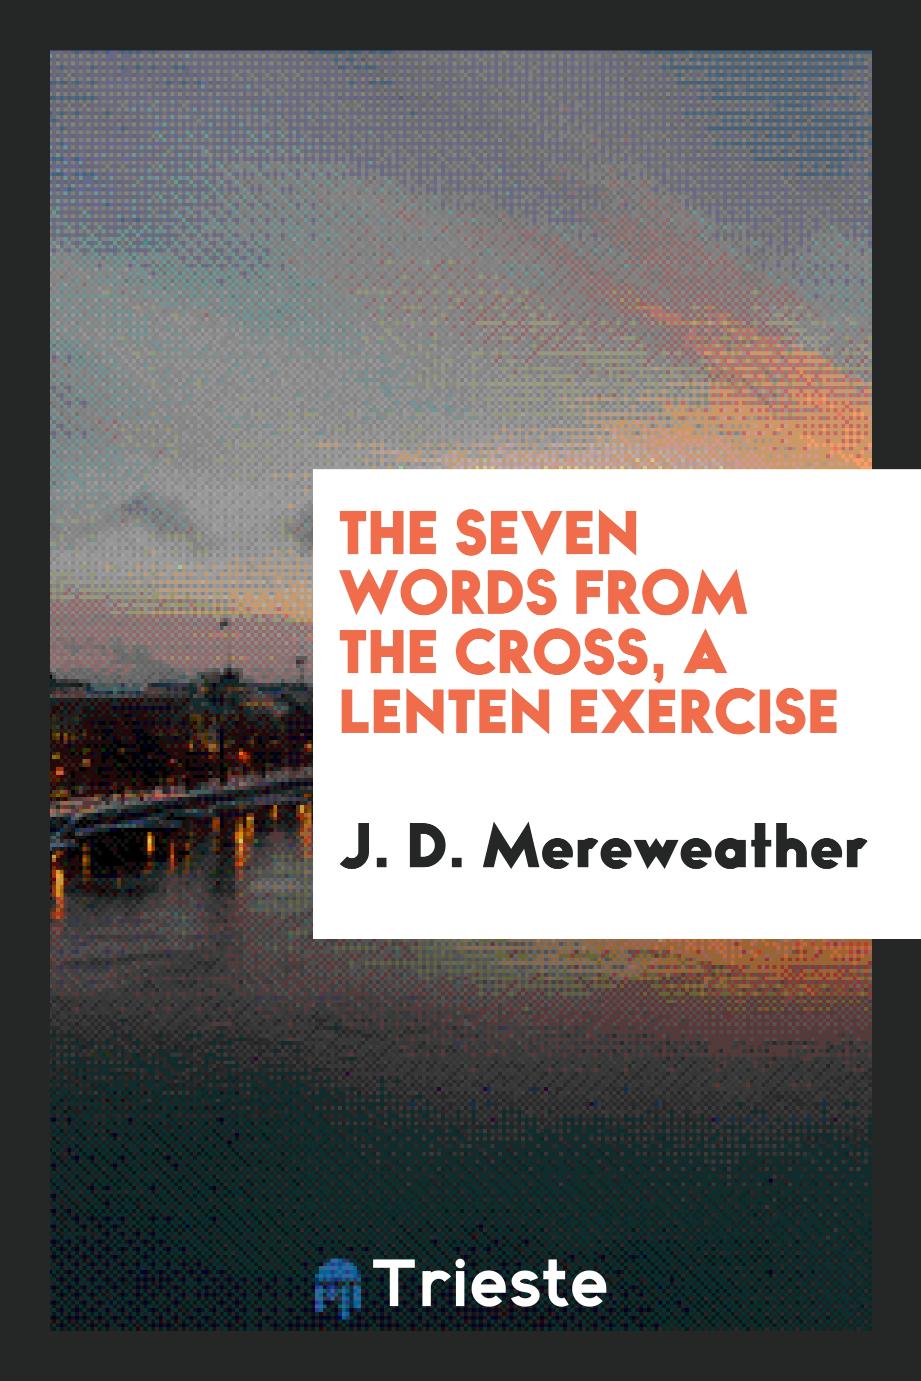 The seven words from the Cross, a Lenten exercise